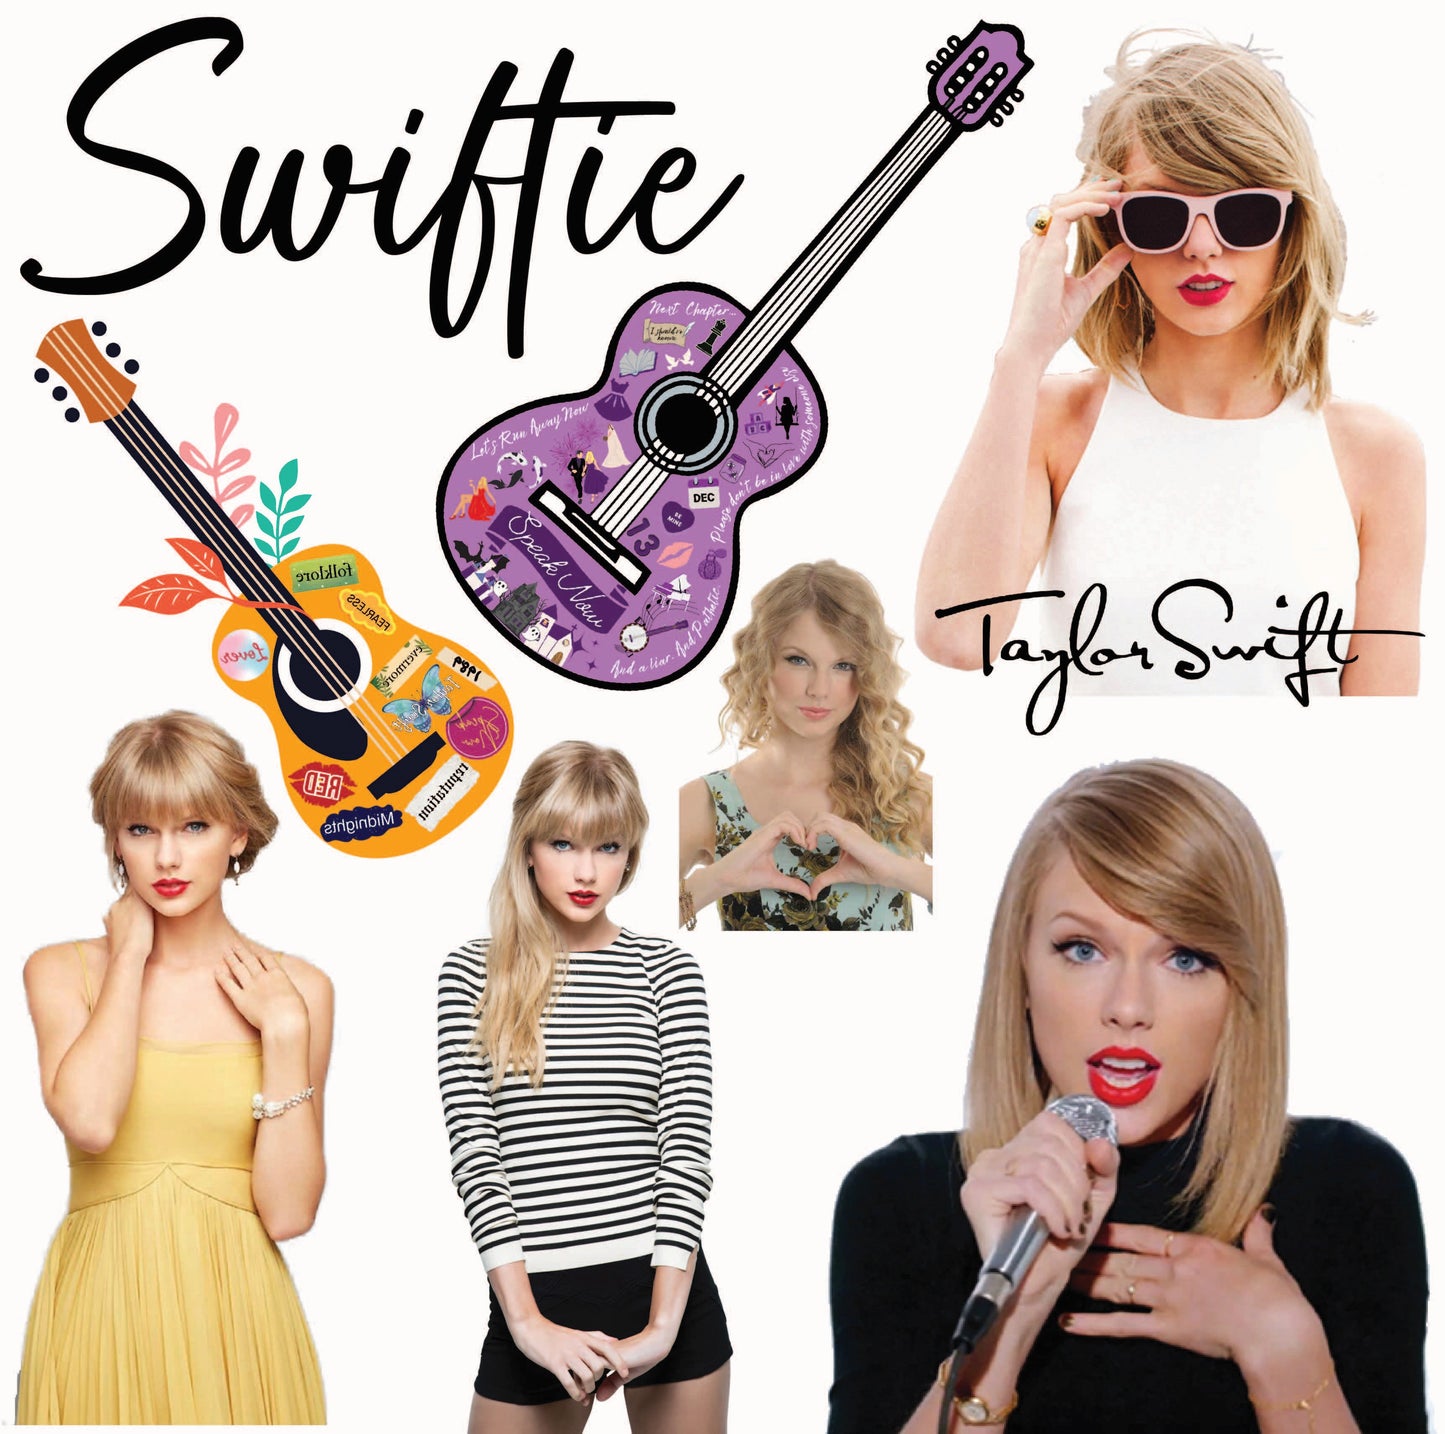 Taylor Swift Half Sheet Misc. (Must Purchase 2 Half sheets - You Can Mix & Match)